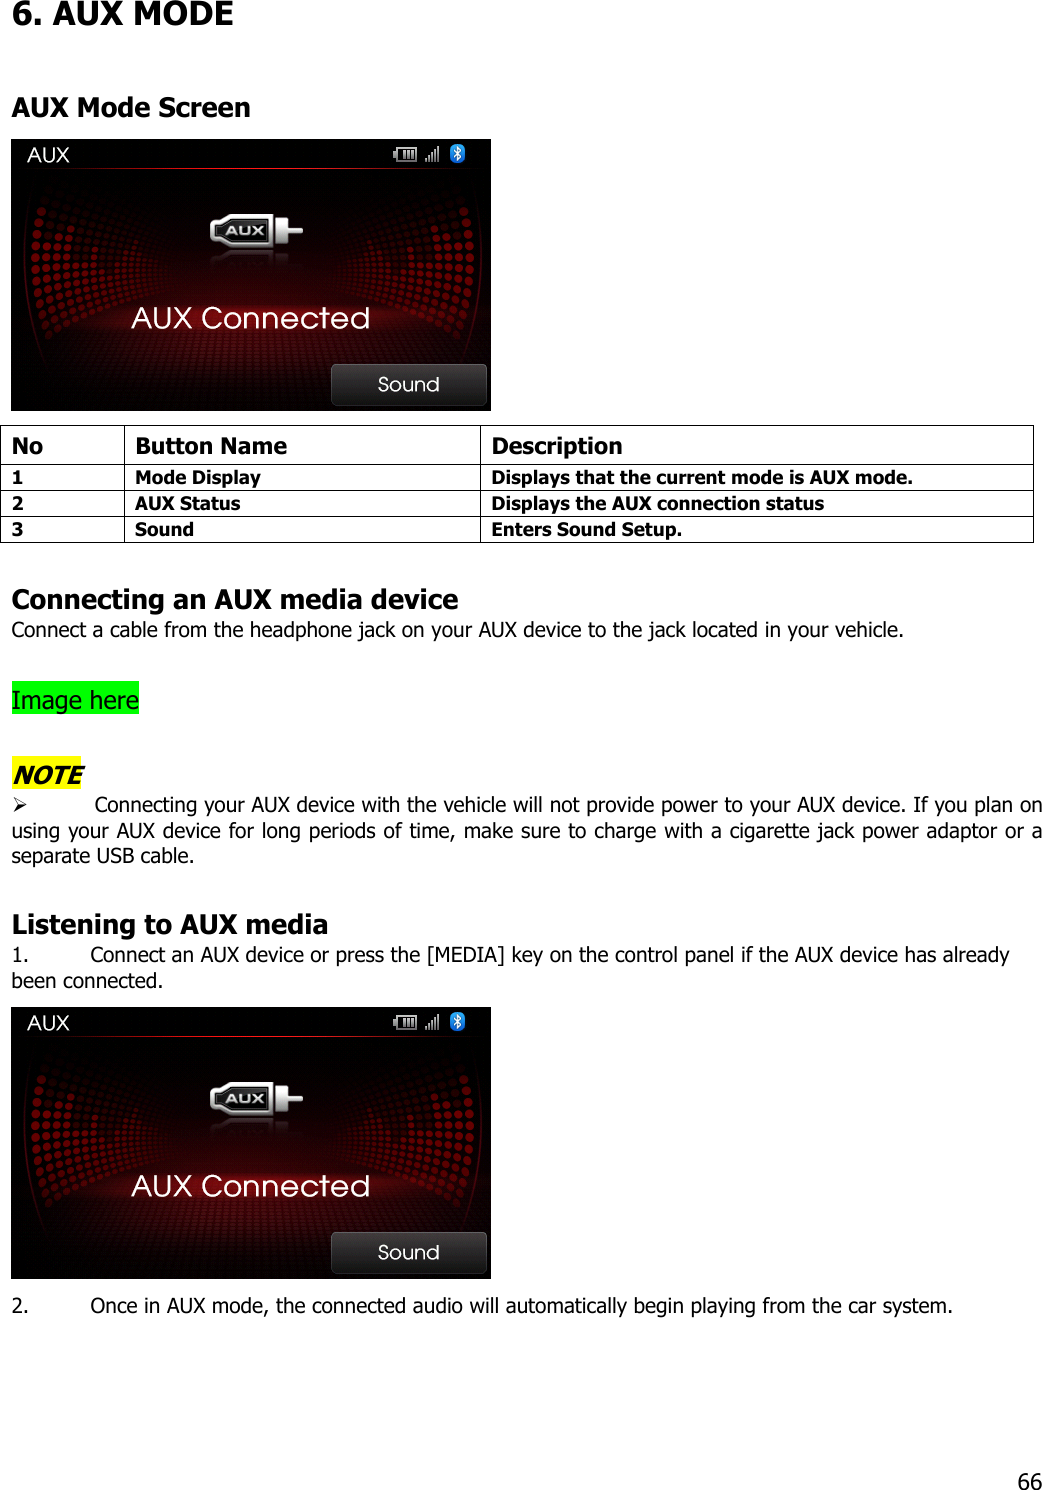 6. AUX MODE  AUX Mode Screen  No Button Name  Description 1  Mode Display  Displays that the current mode is AUX mode. 2  AUX Status  Displays the AUX connection status 3  Sound  Enters Sound Setup.   Connecting an AUX media device Connect a cable from the headphone jack on your AUX device to the jack located in your vehicle.    Image here  NOTE  Connecting your AUX device with the vehicle will not provide power to your AUX device. If you plan on using your AUX device for long periods of time, make sure to charge with a cigarette jack power adaptor or a separate USB cable.    Listening to AUX media 1. Connect an AUX device or press the [MEDIA] key on the control panel if the AUX device has already been connected.    2. Once in AUX mode, the connected audio will automatically begin playing from the car system.    66